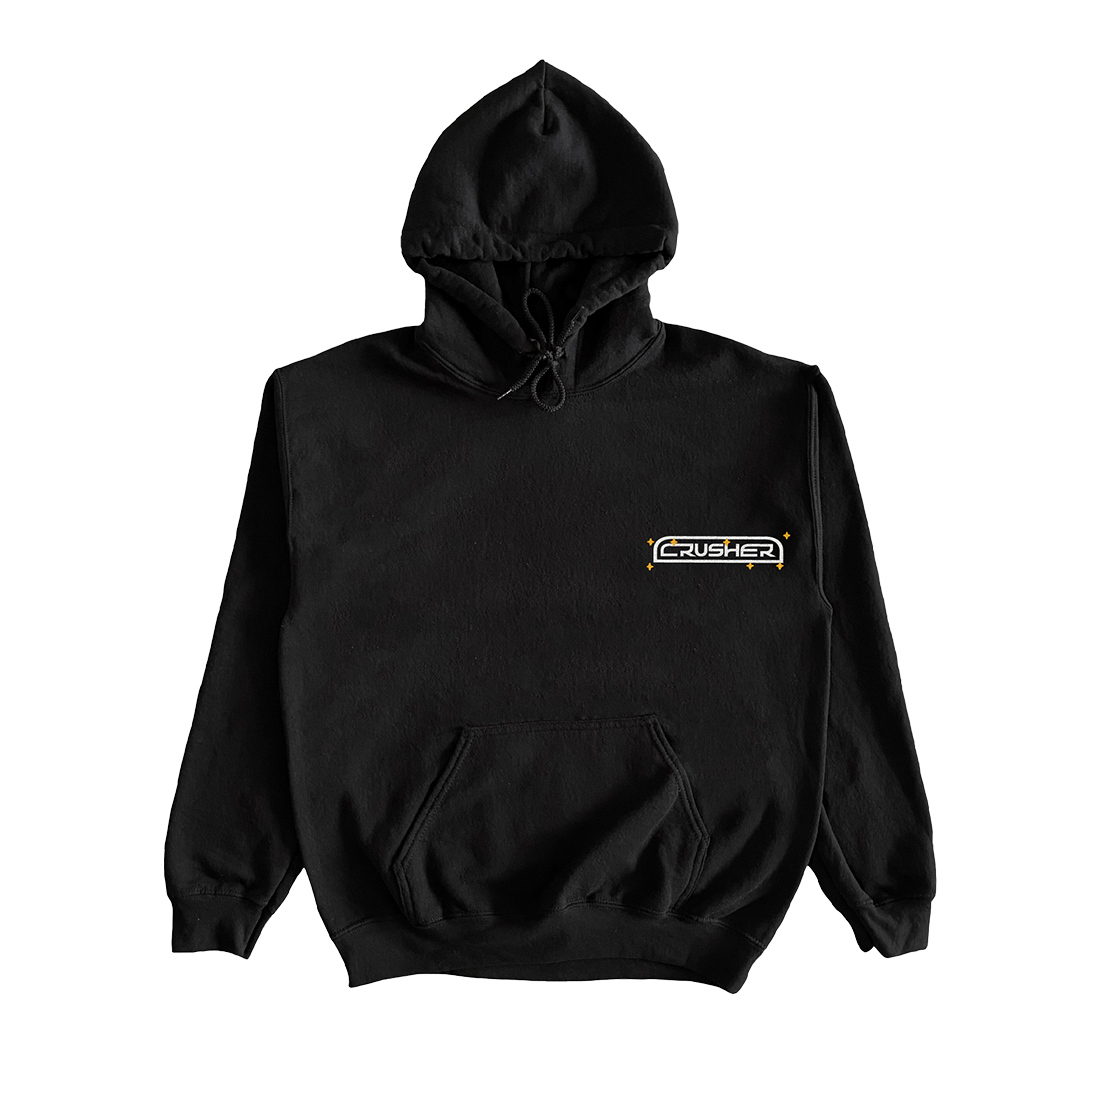 crusher hoodie front